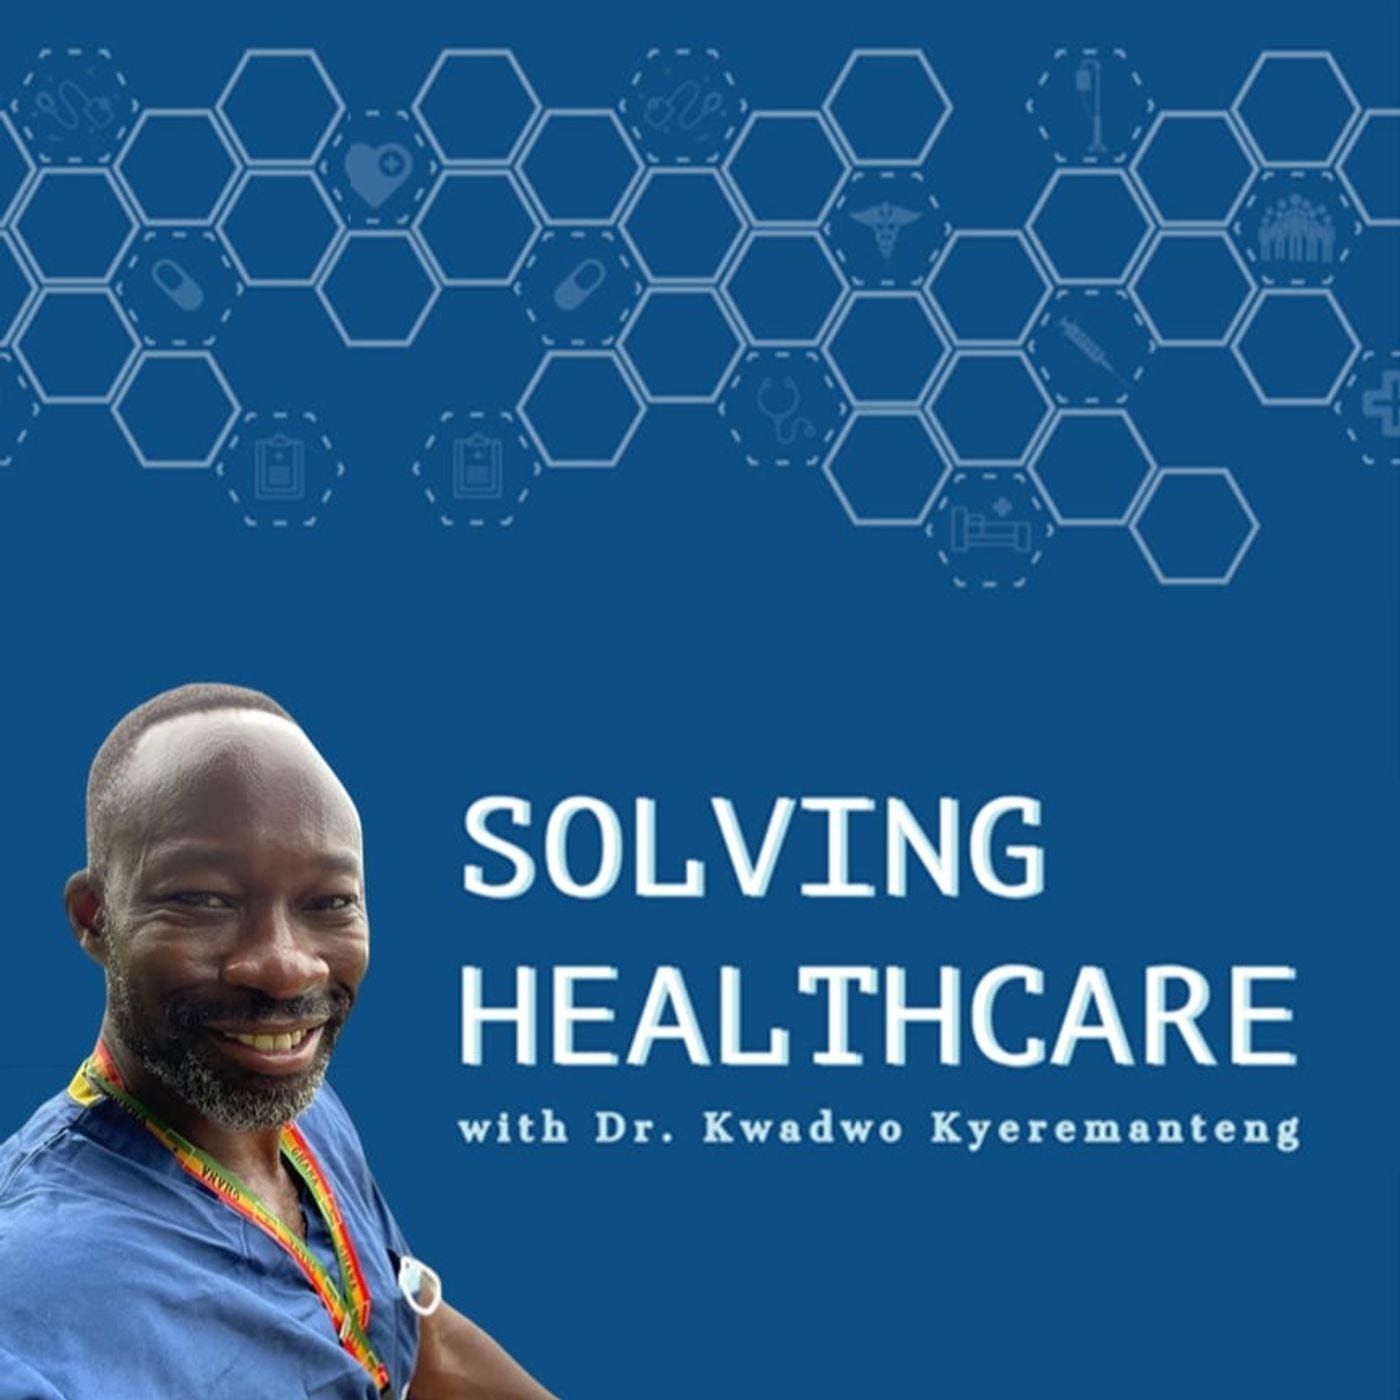 Revolutionizing Healthcare: Time for Creative Solutions